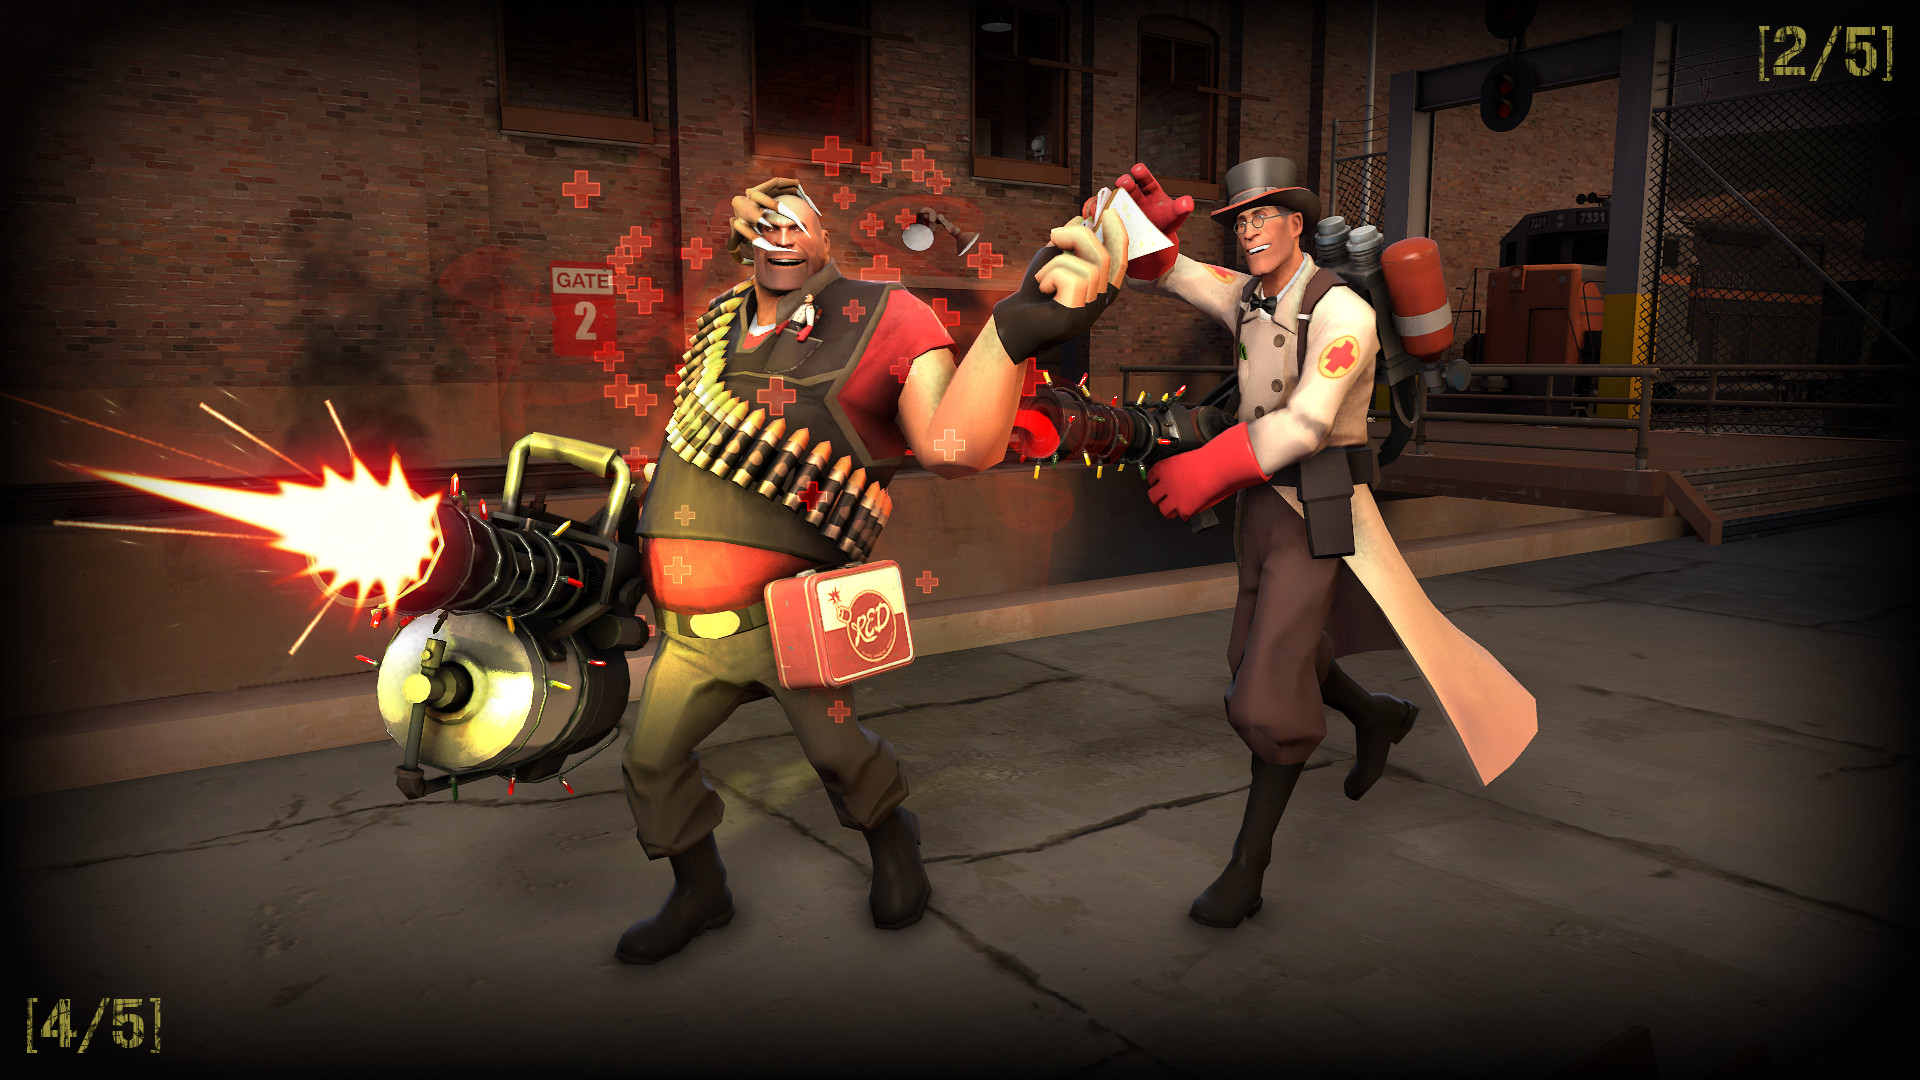 1920x1080 99 MORE TF2 Wallpapers made in SFM - Album on Imgur ...